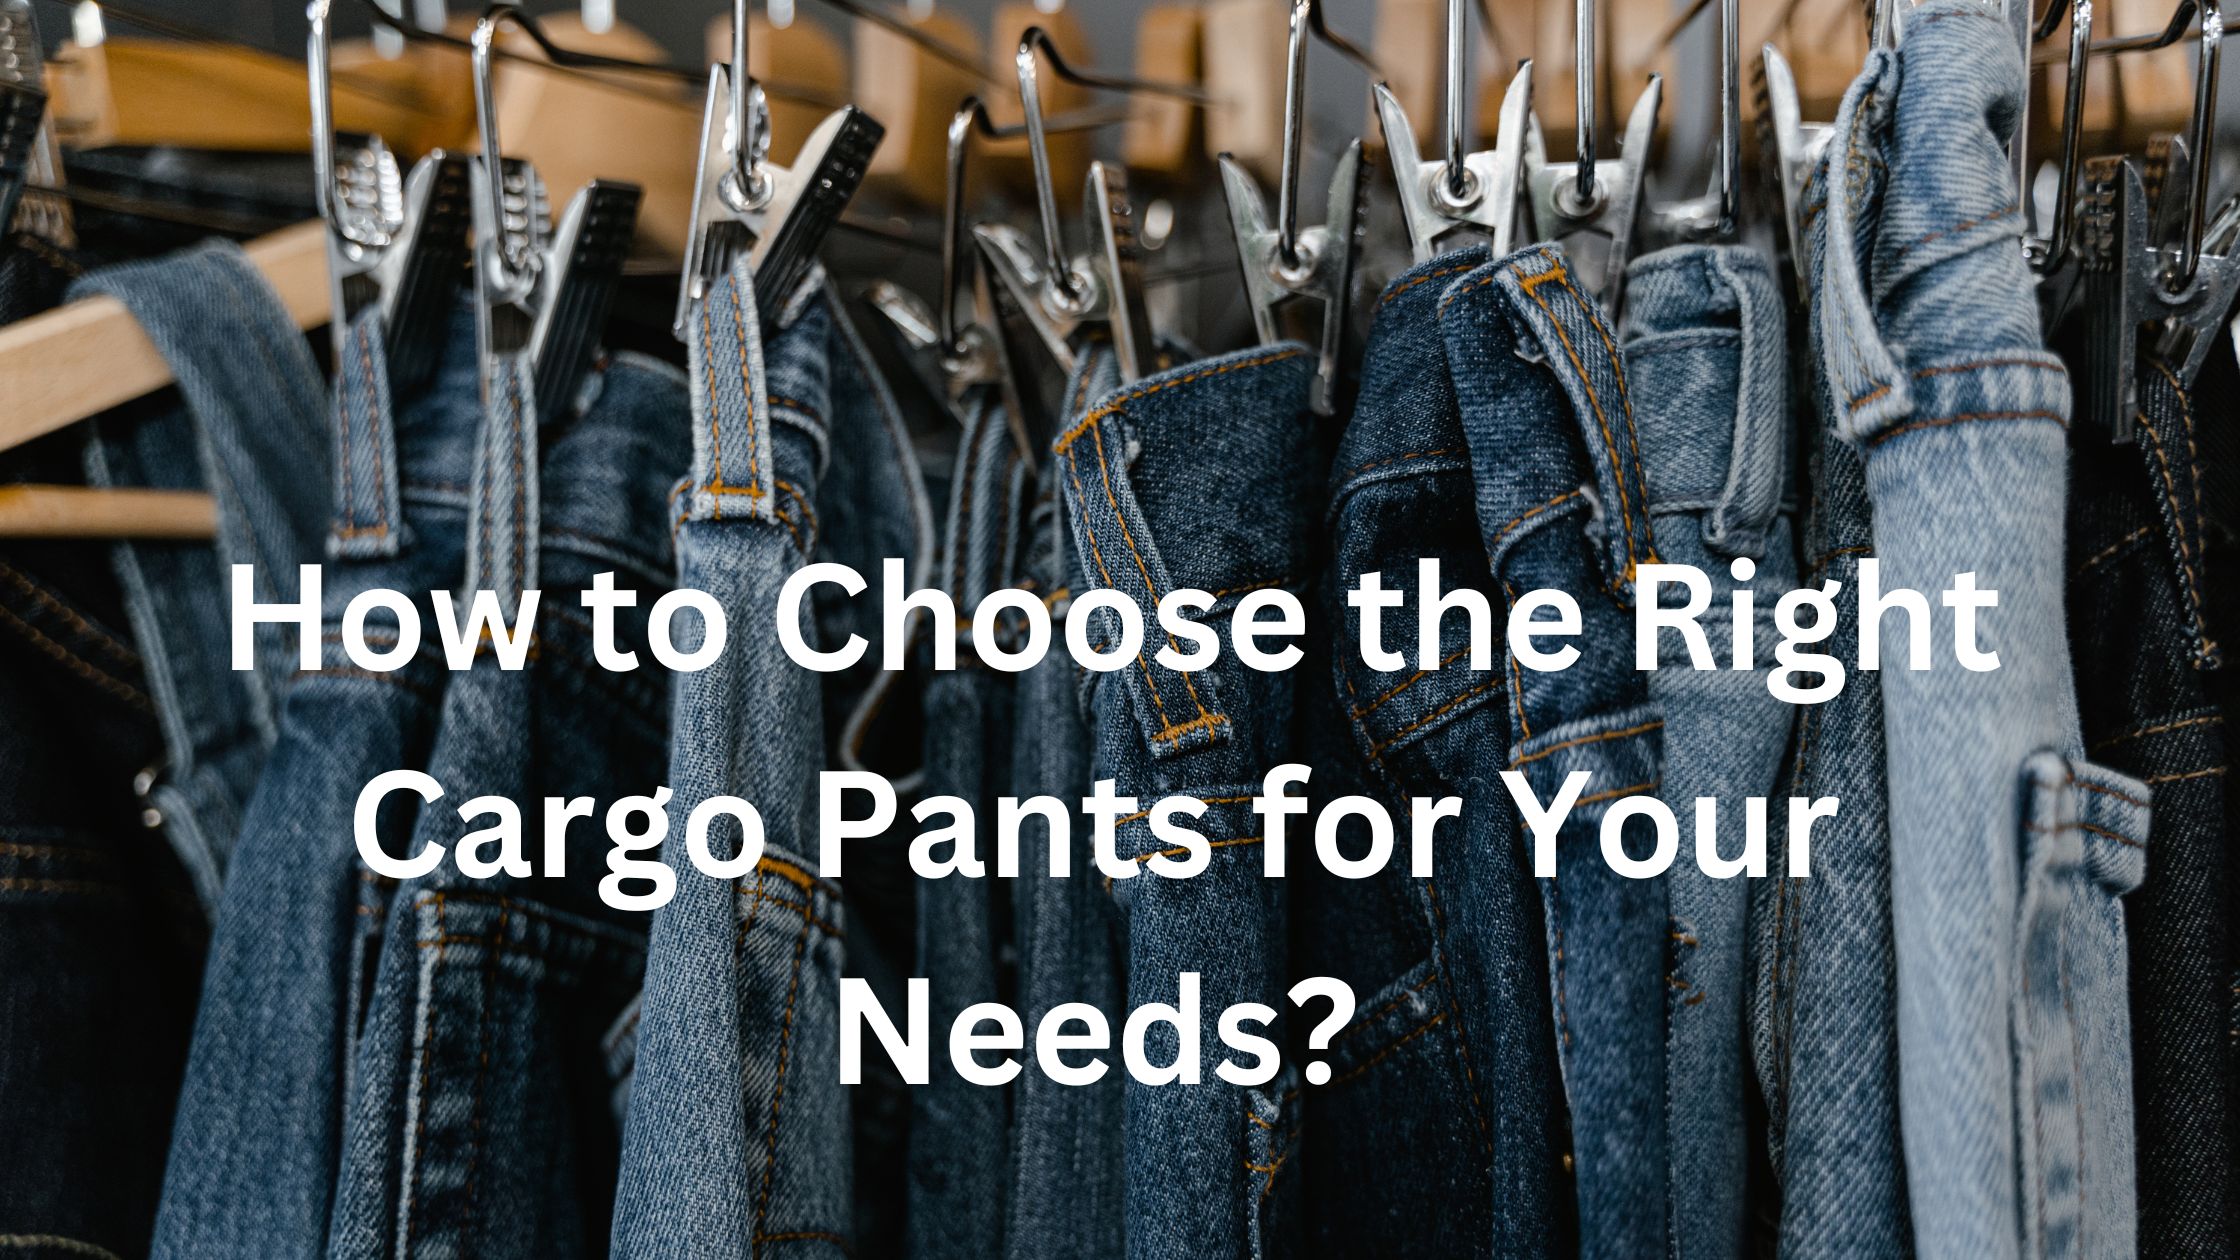 How to Choose the Right Cargo Pants for Your Needs?